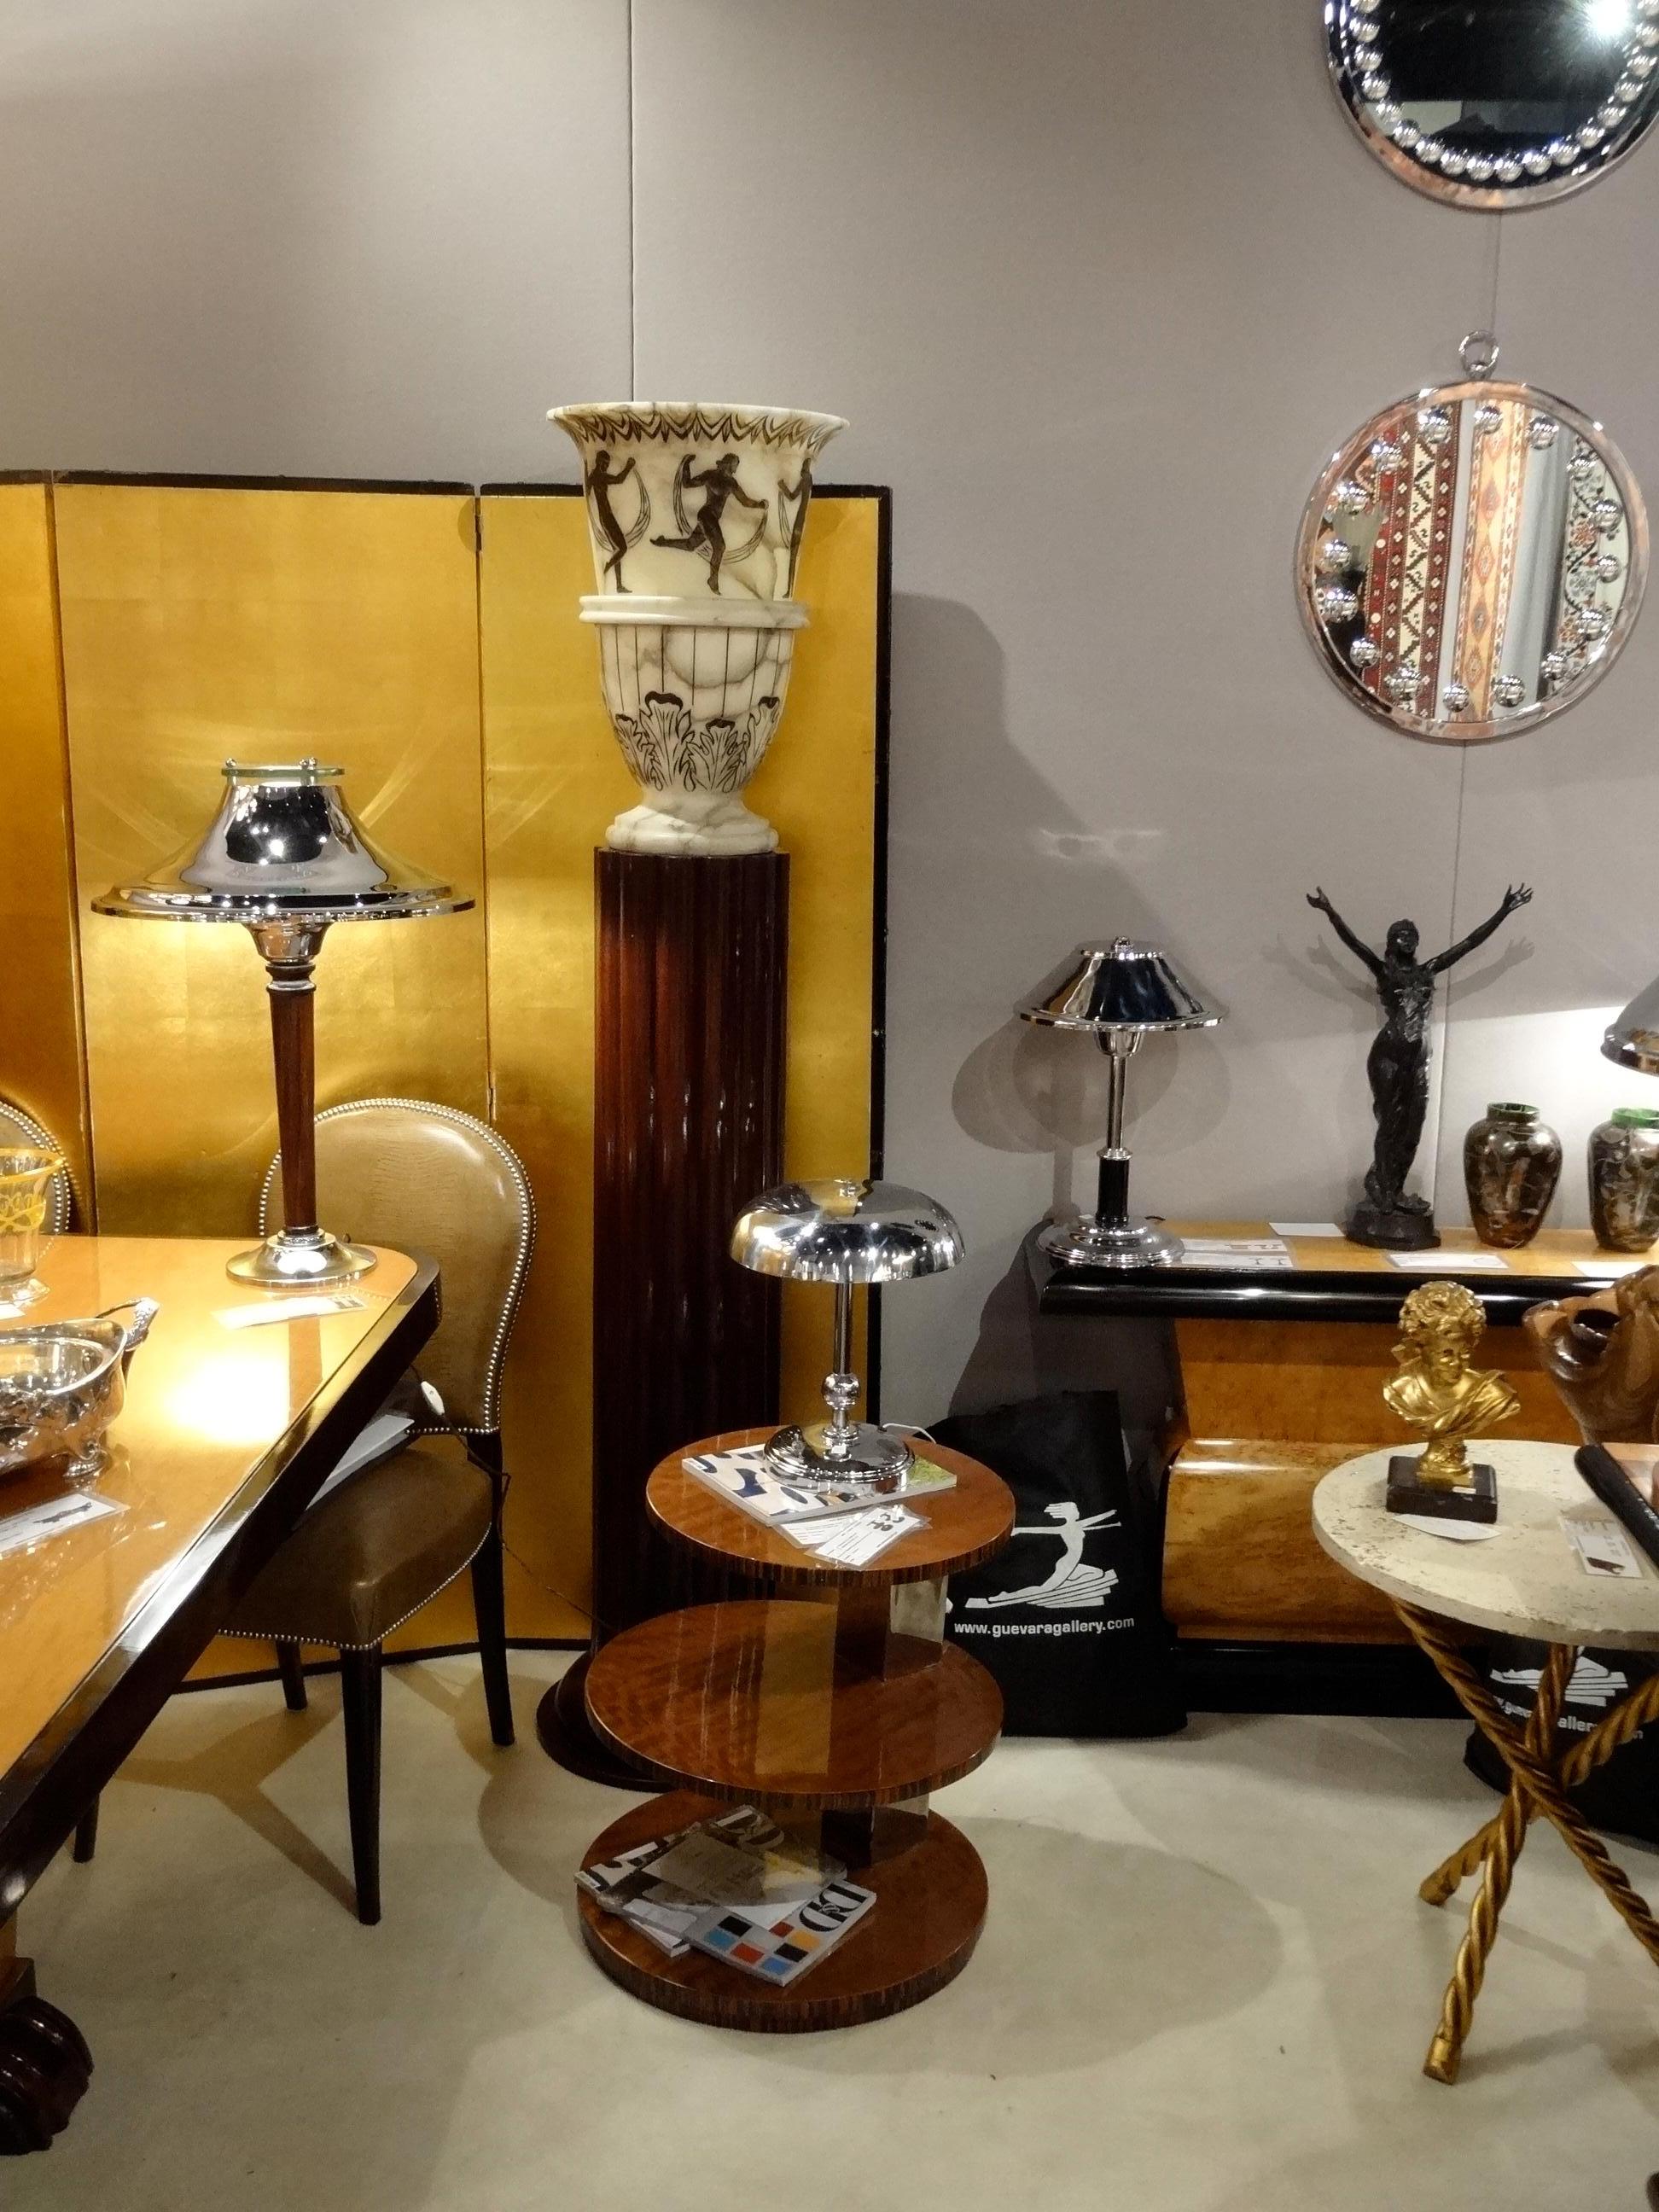 Table lamps Art deco.
Exhibited at Original antique show ( Miami beach ) and Palm beach 